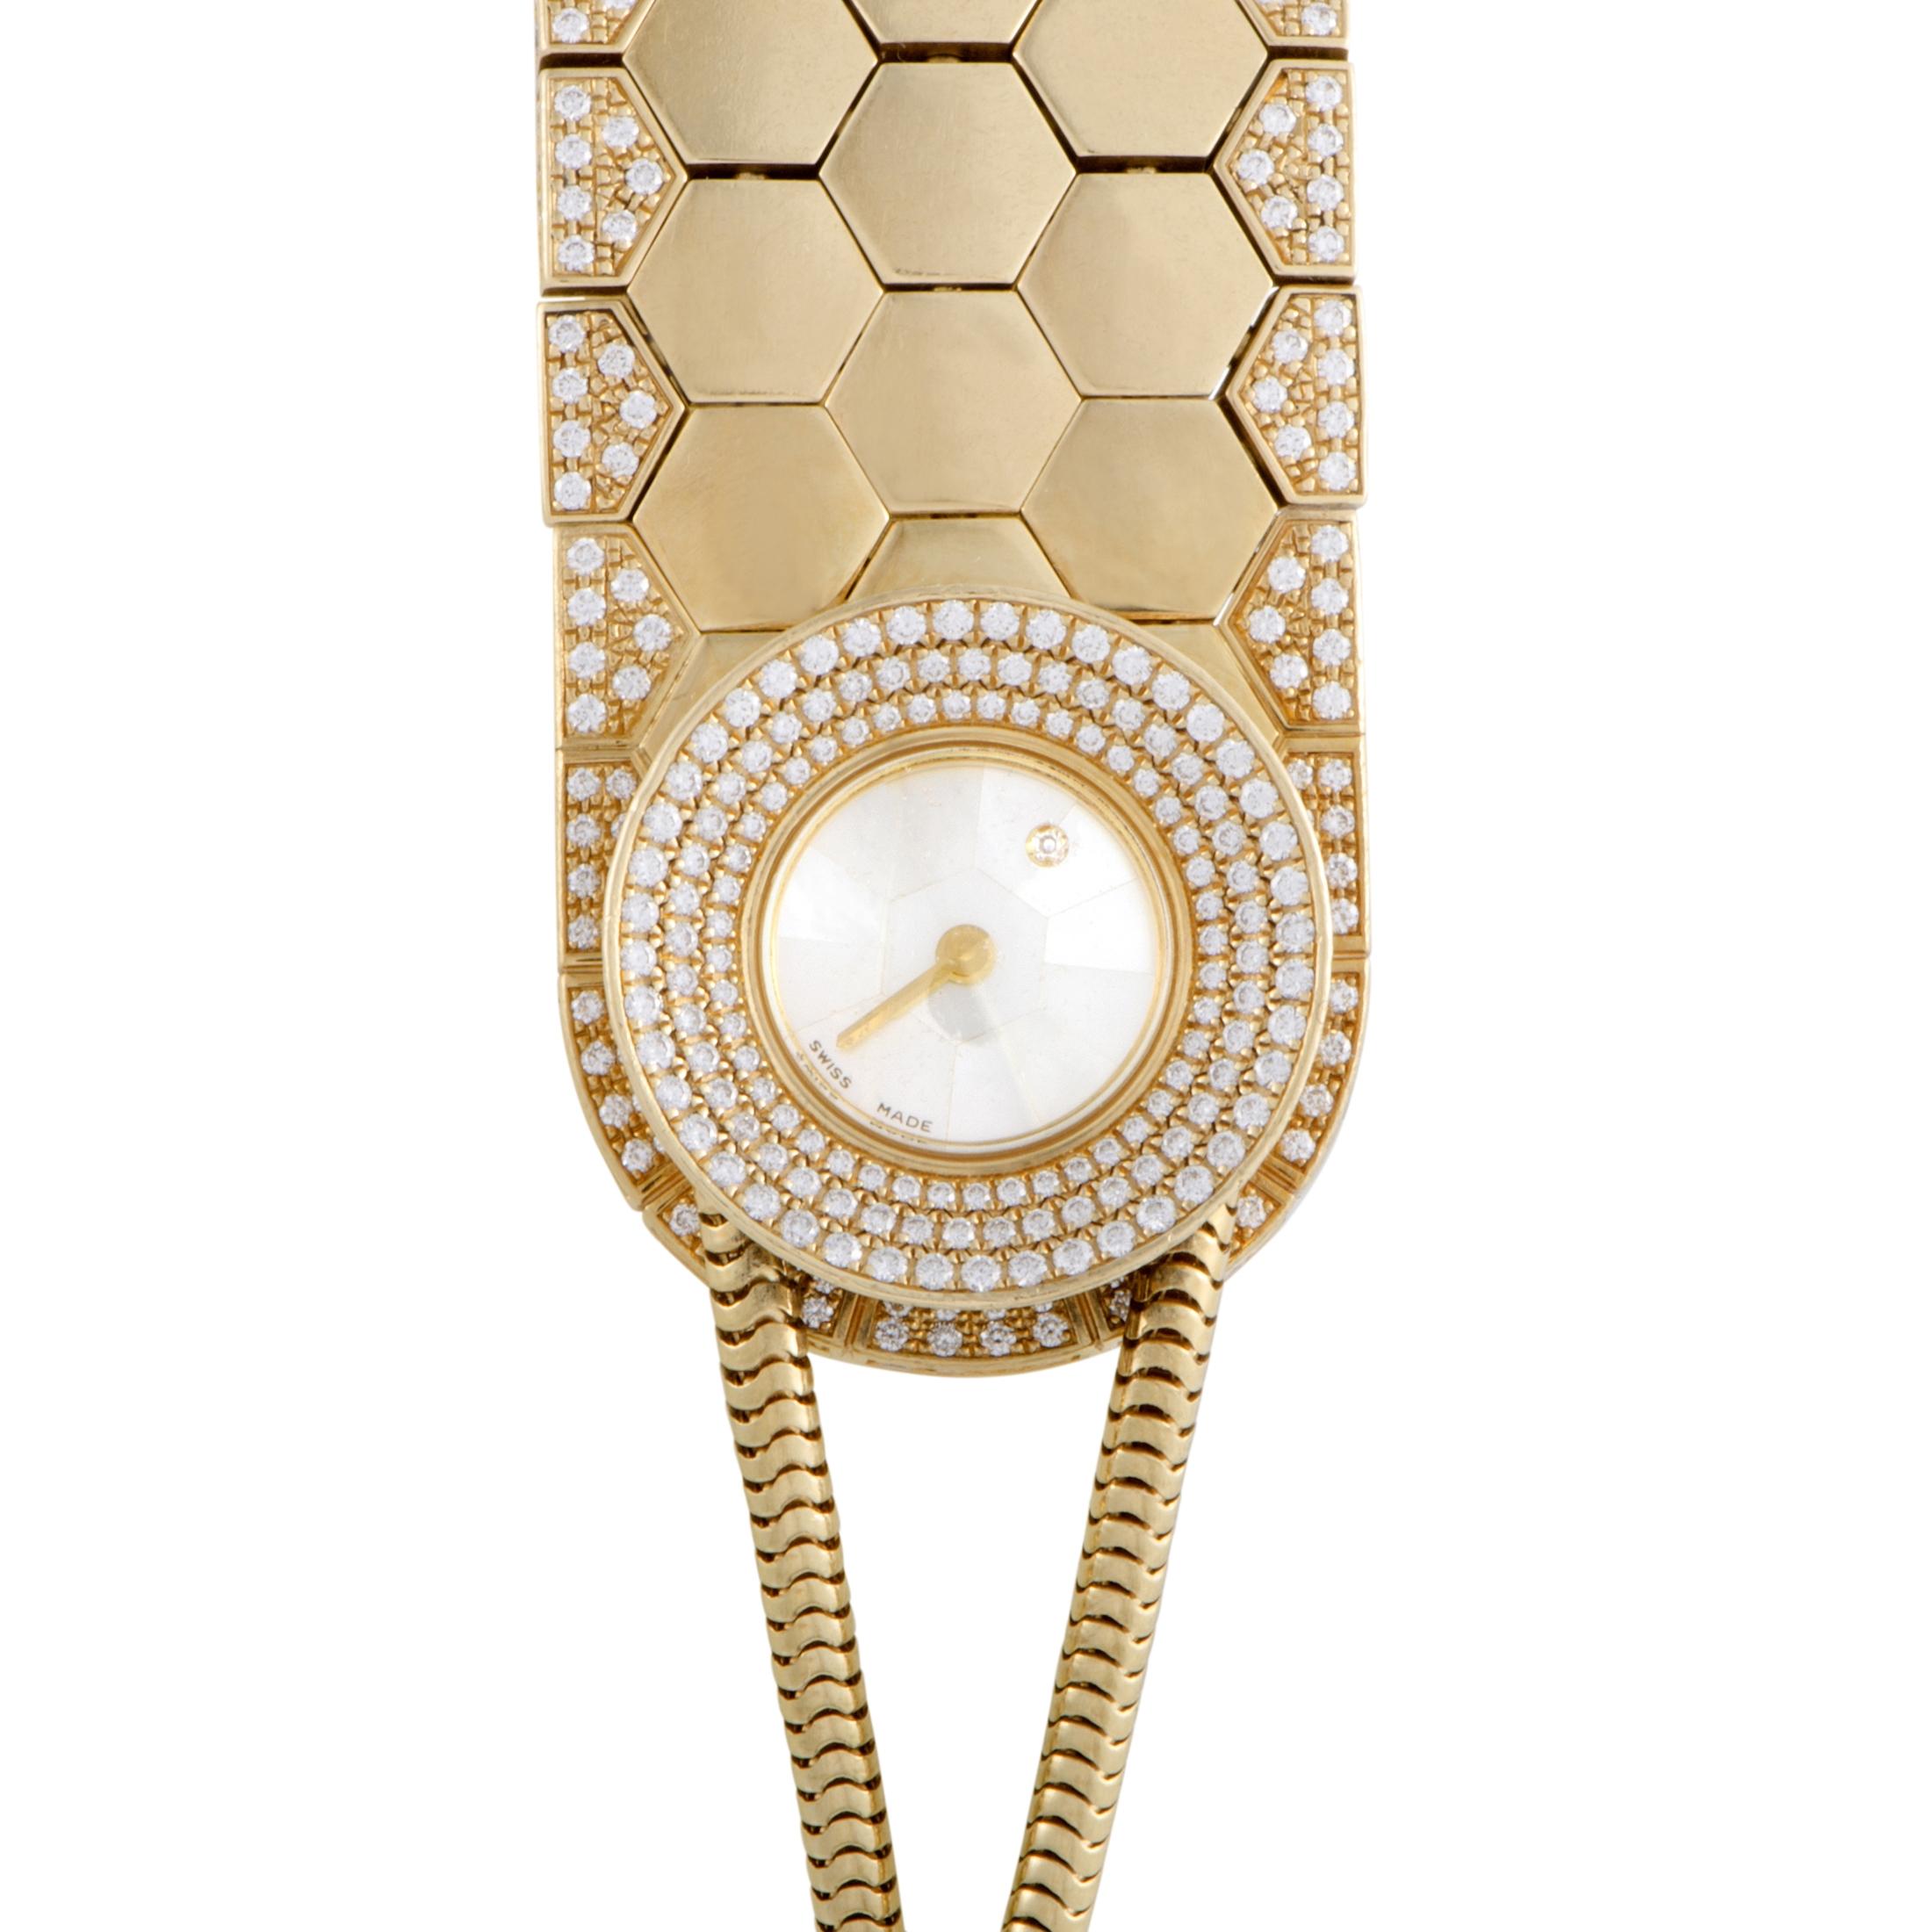 Irresistibly unconventional and extraordinarily lavish, this exquisite timepiece from Van Cleef & Arpels boldly blurs the line between high-end watchmaking and prestigious jewelry, boasting intriguingly shaped and immaculately radiant gold along